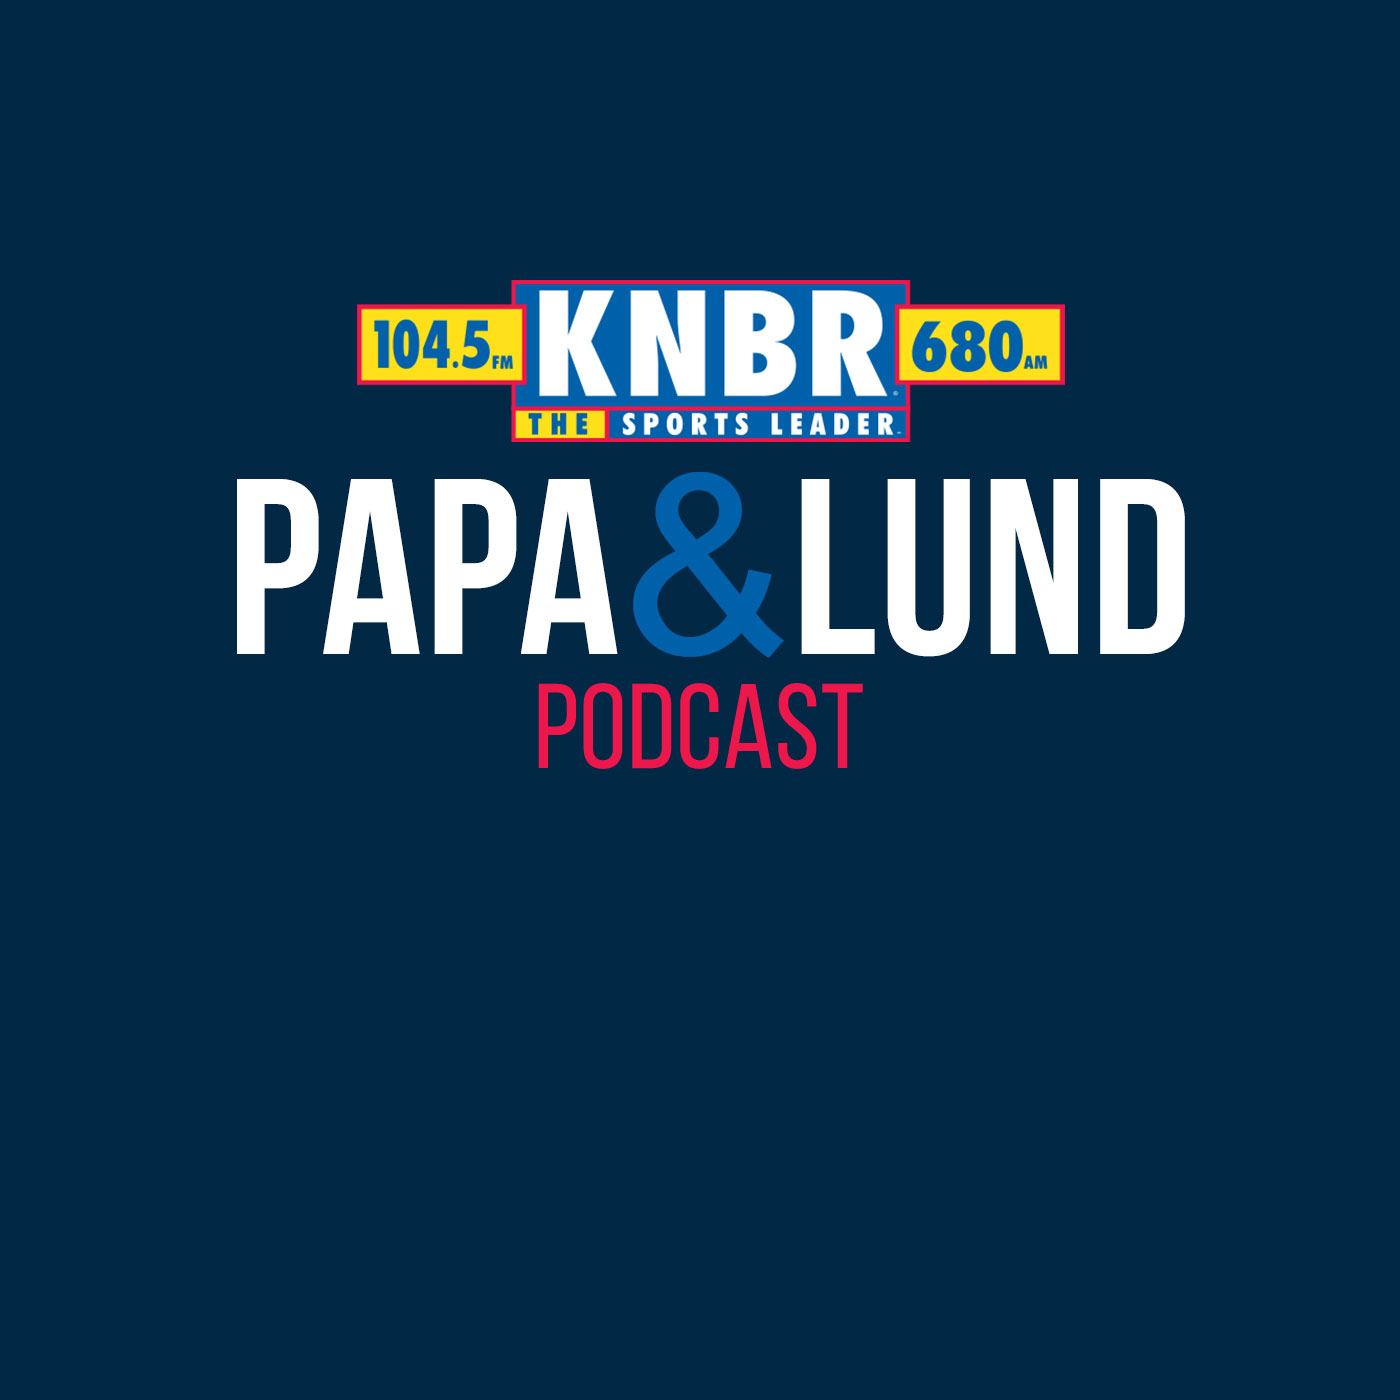 3-6 Monte Poole joins Papa & Lund to discuss what Wiggins return means for the Warriors as they head down the final stretch of the NBA season